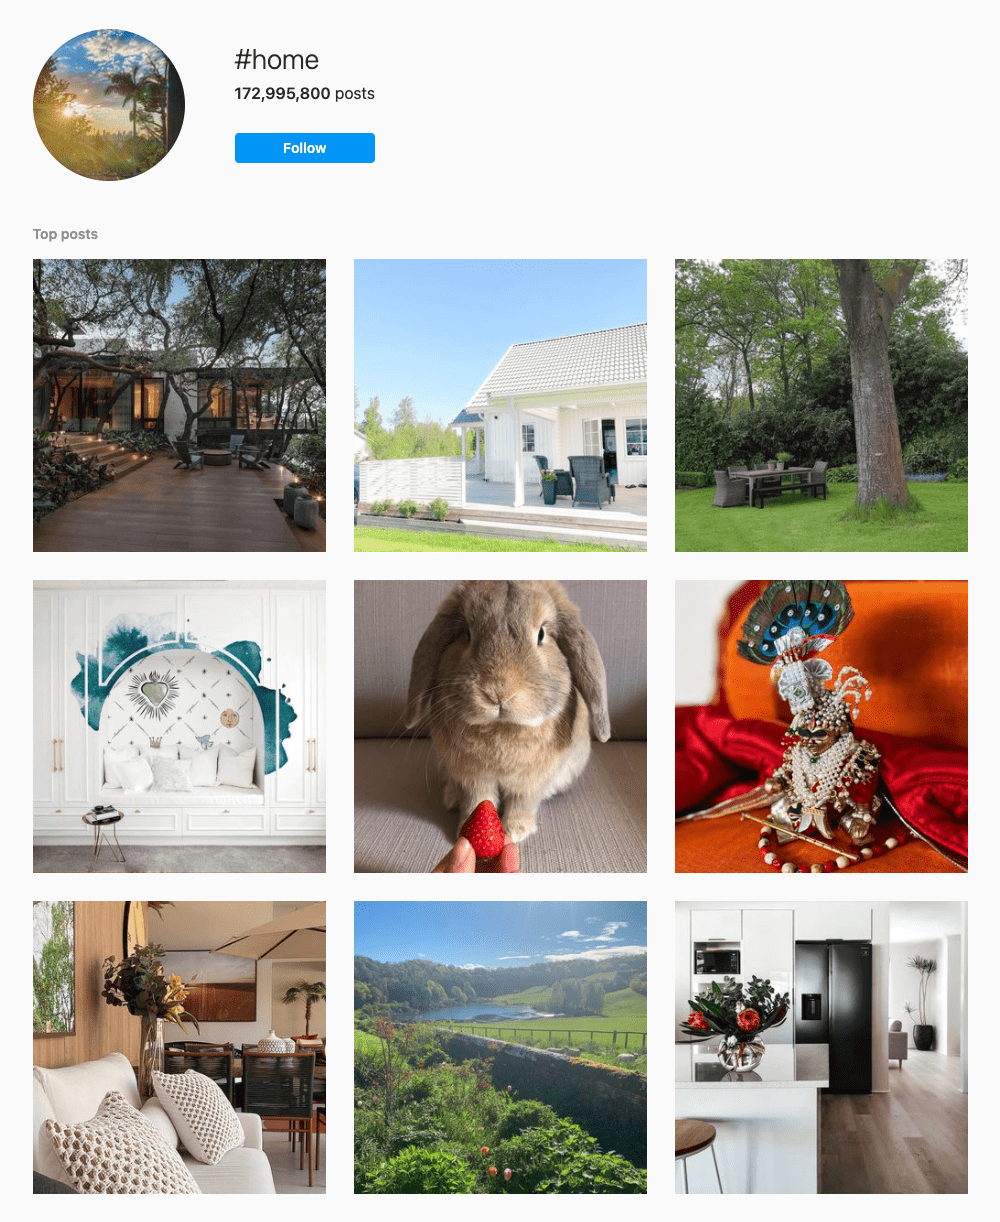 #home Hashtags for Instagram